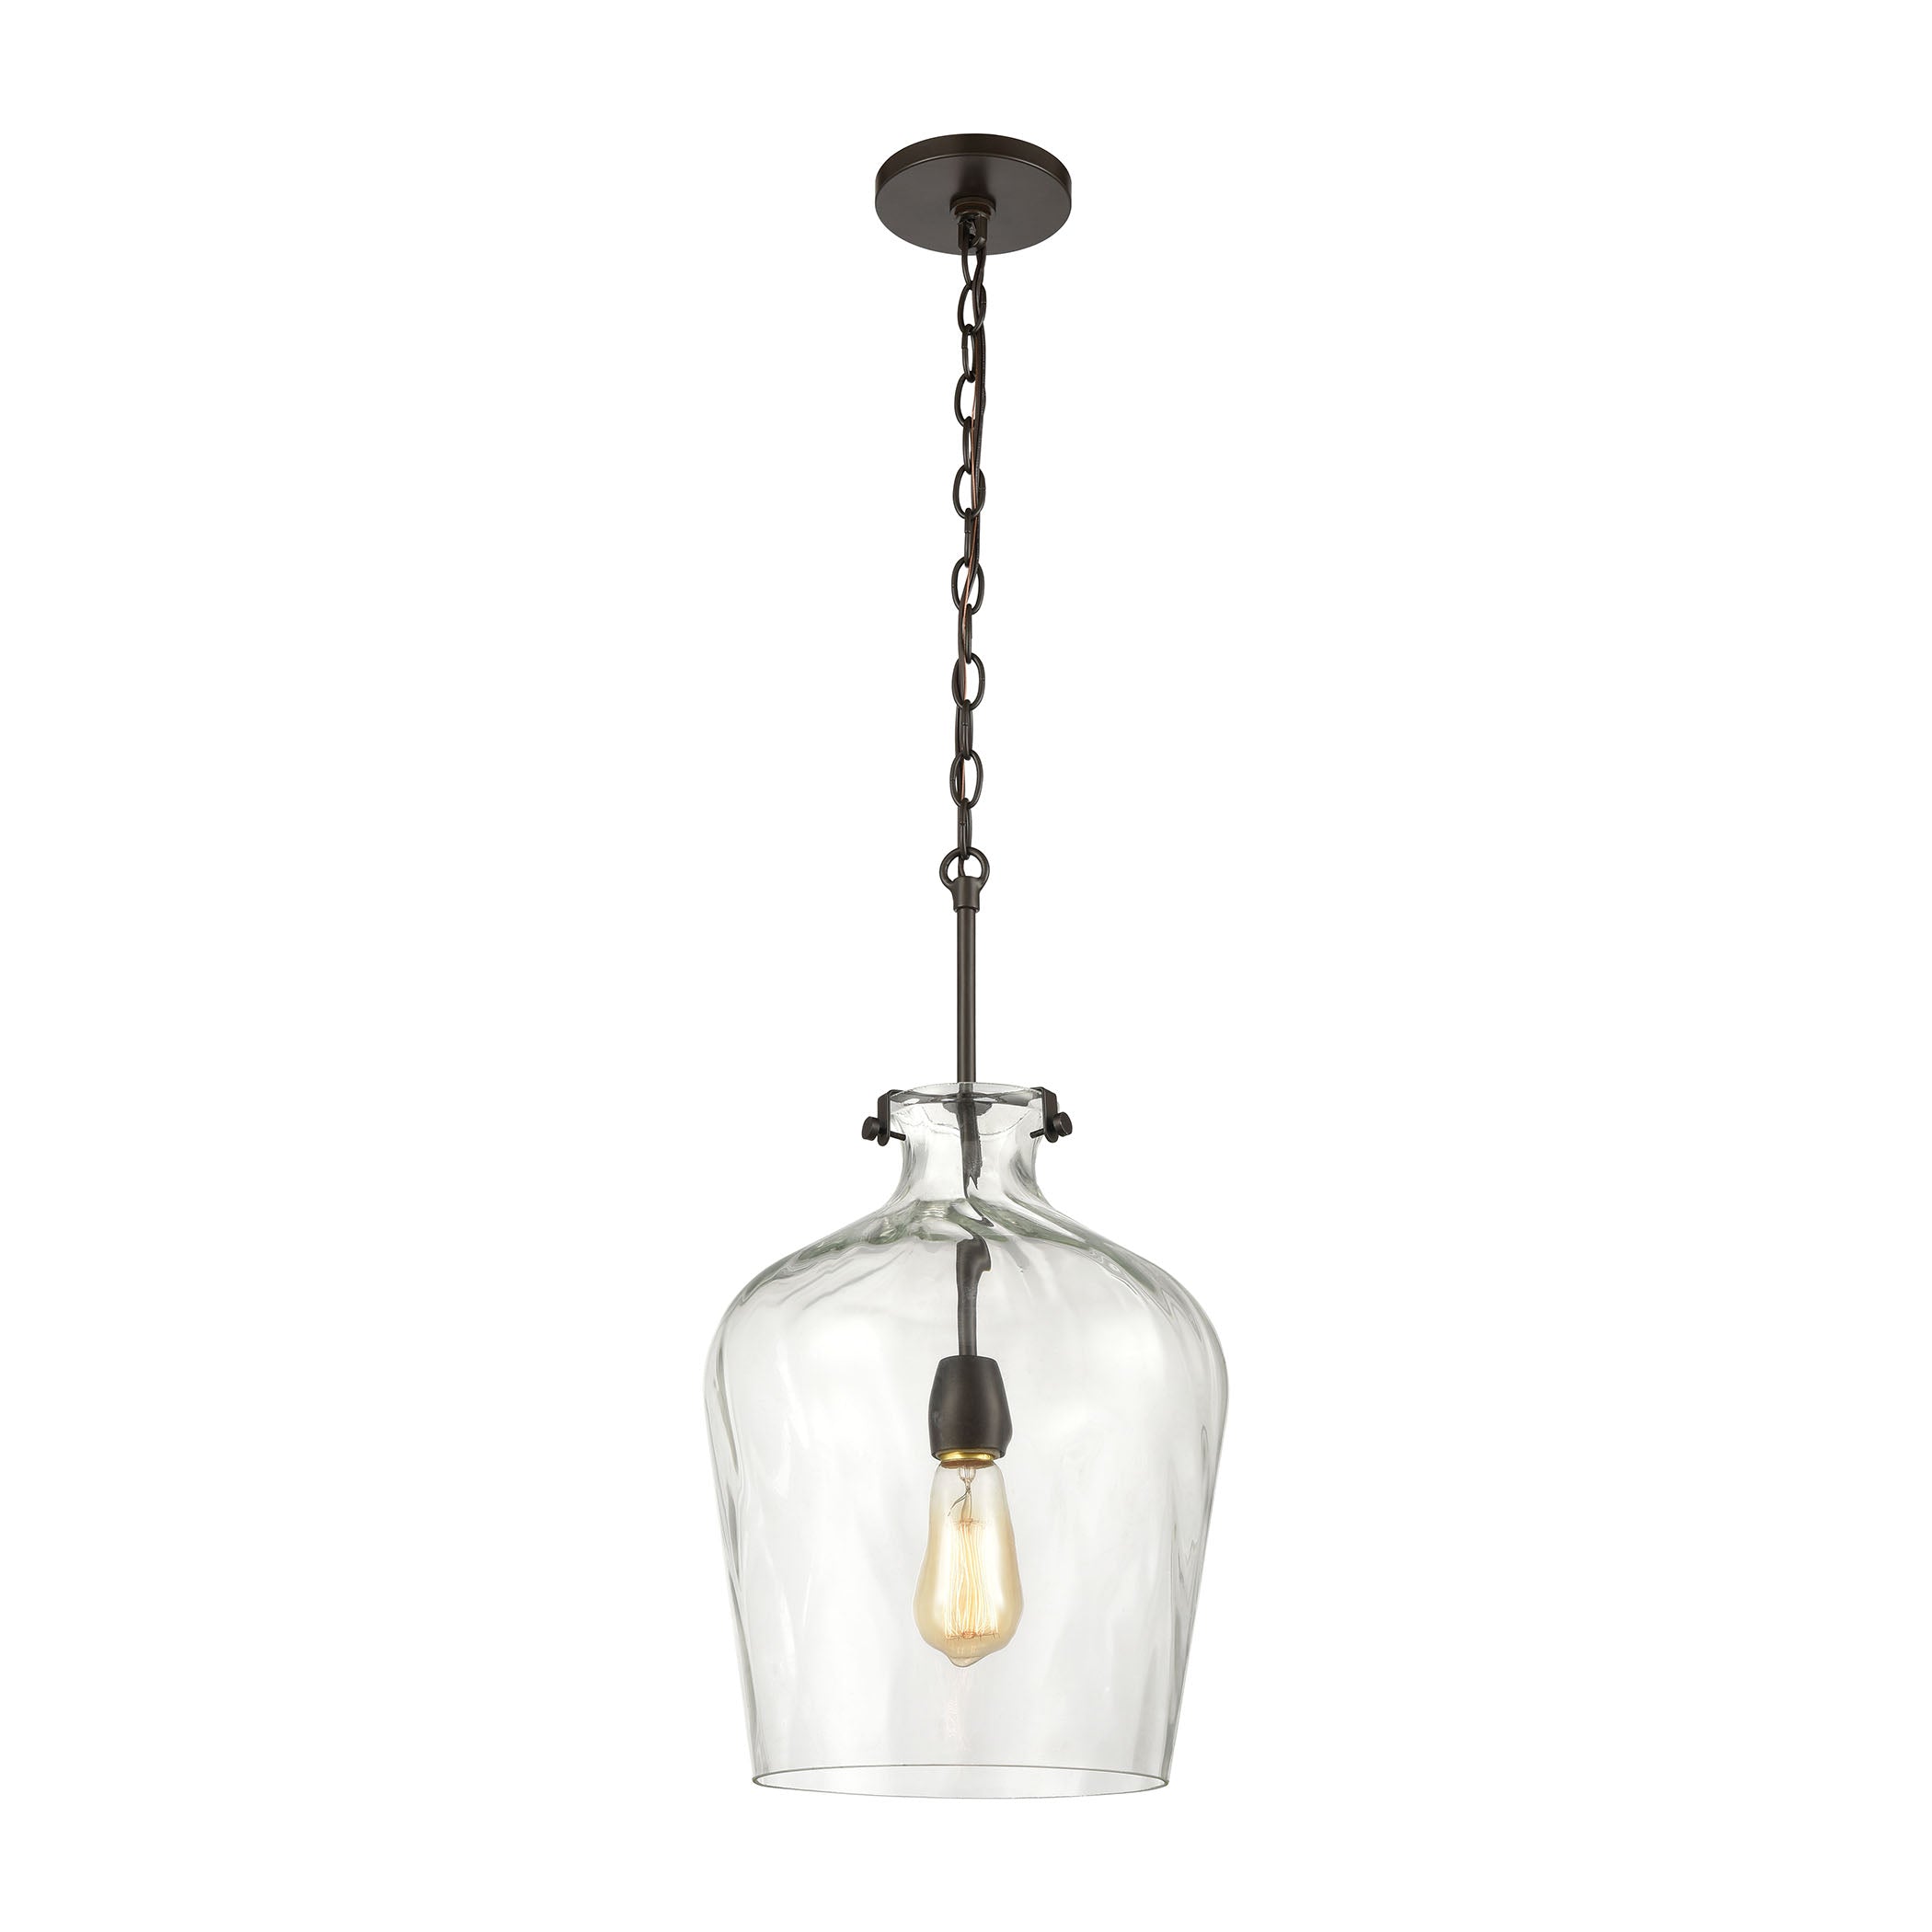 ELK Lighting 30070/1 Tuscan Villa 1-Light Pendant in Oil Rubbed Bronze with Wavy Glass